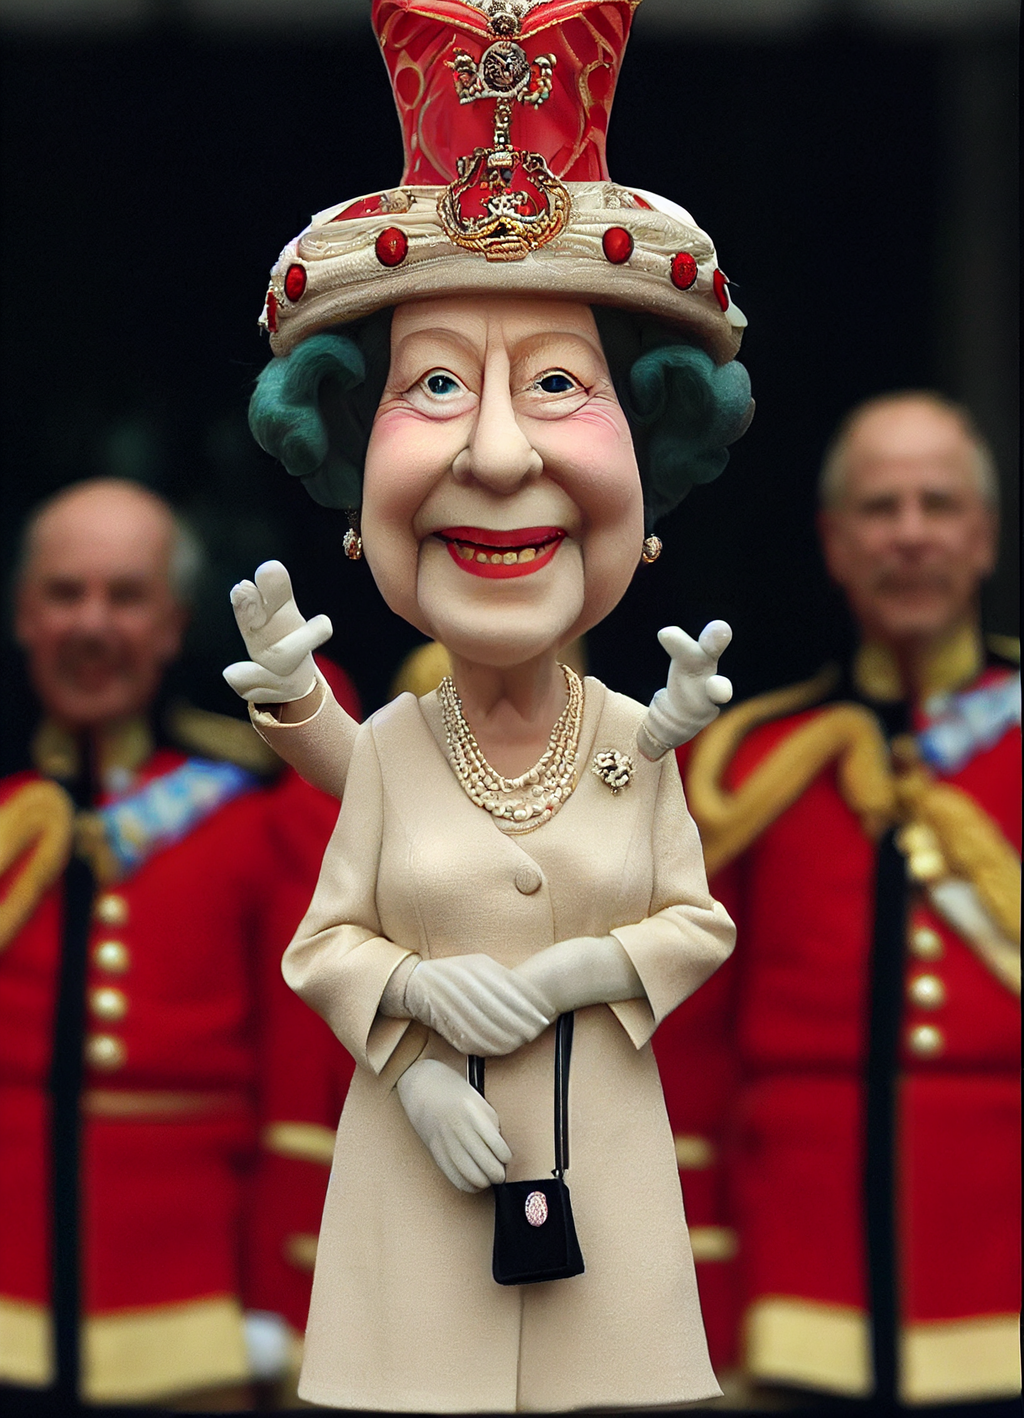 Queen Elizabeth II in front of Buckingham Palace, smiling and waving to the crowd, queen’s guards stand in her sides, in the style of Aardman, made of claymations